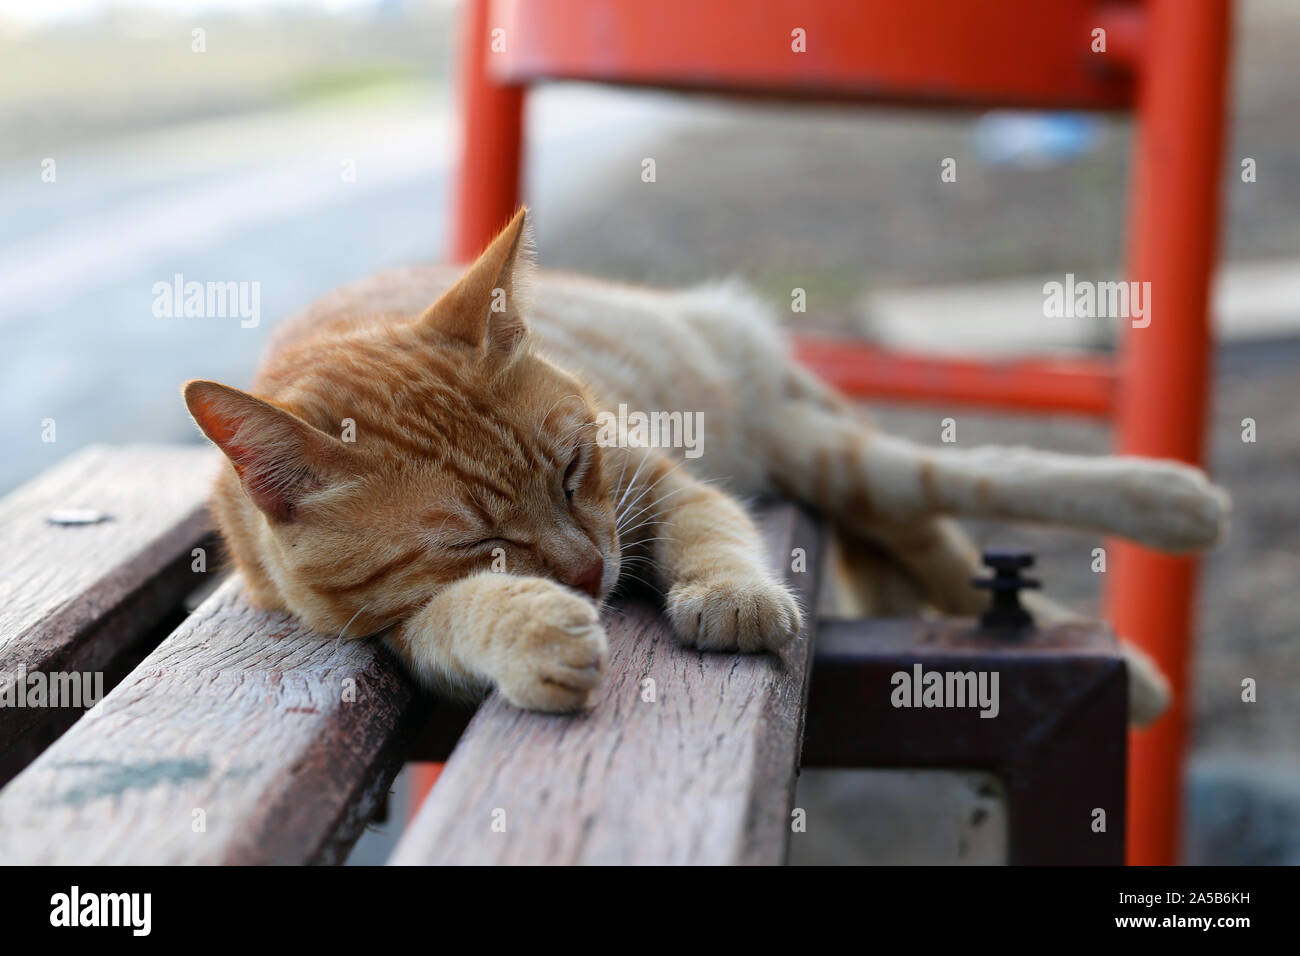 Cute wild cat photographed in the island of Cyprus. Fluffy, furry animal. This cat is a striped orange / brown one and it is sleeping on a bench. Stock Photo